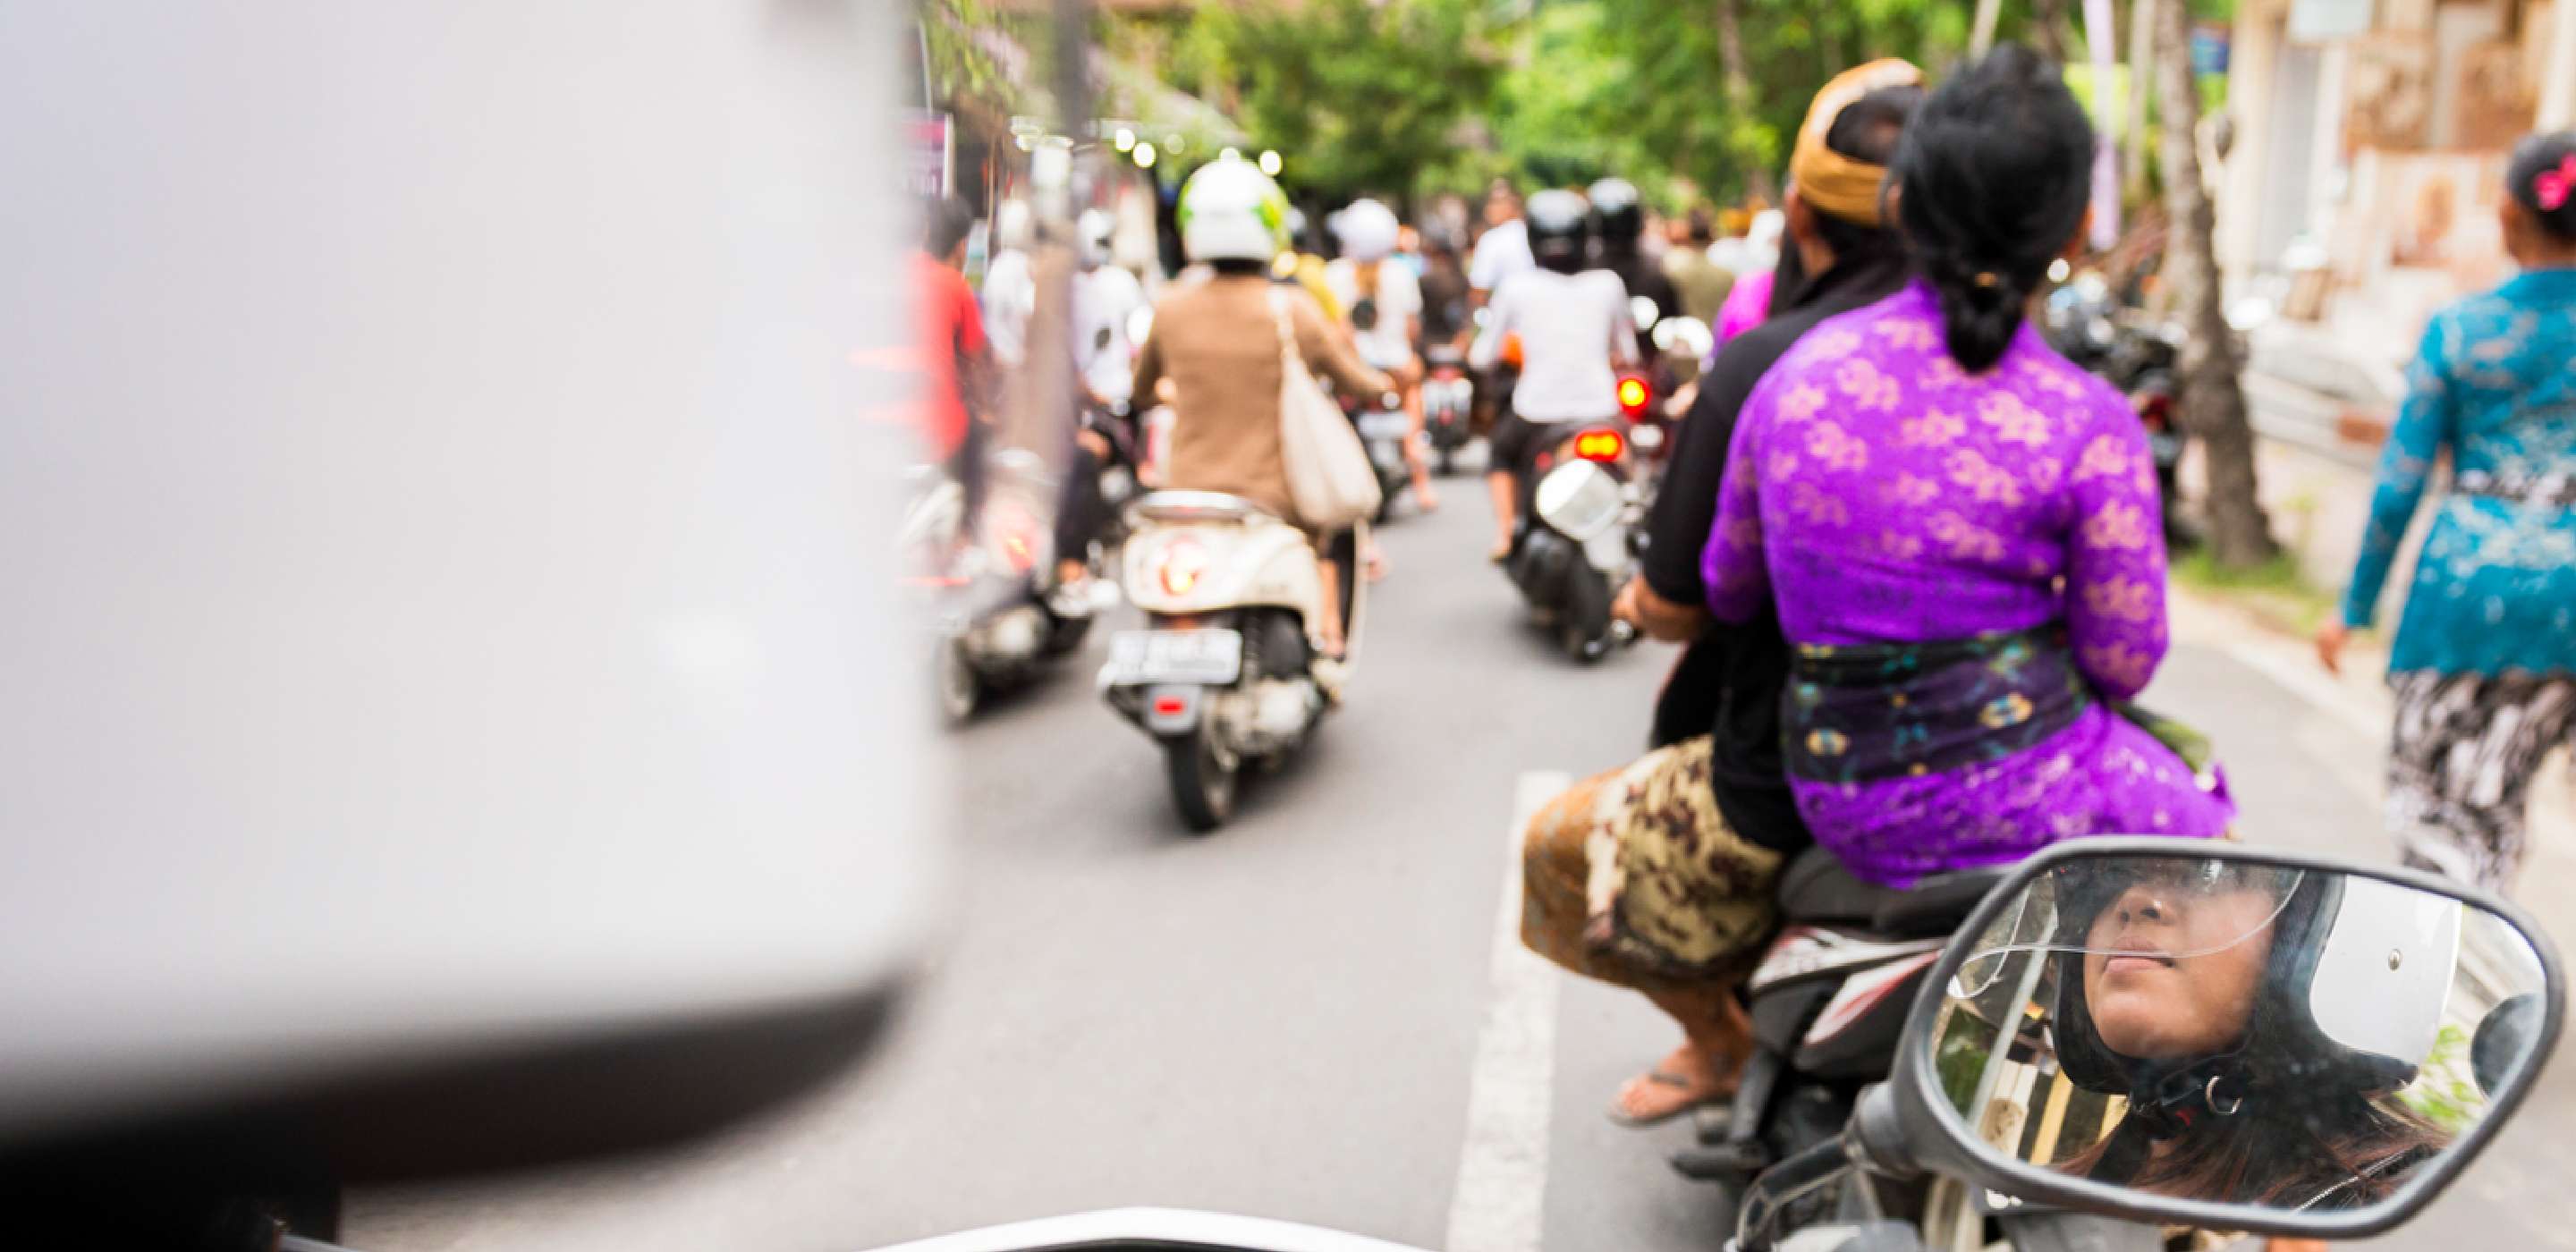 Back view of people riding motor bikes on the road